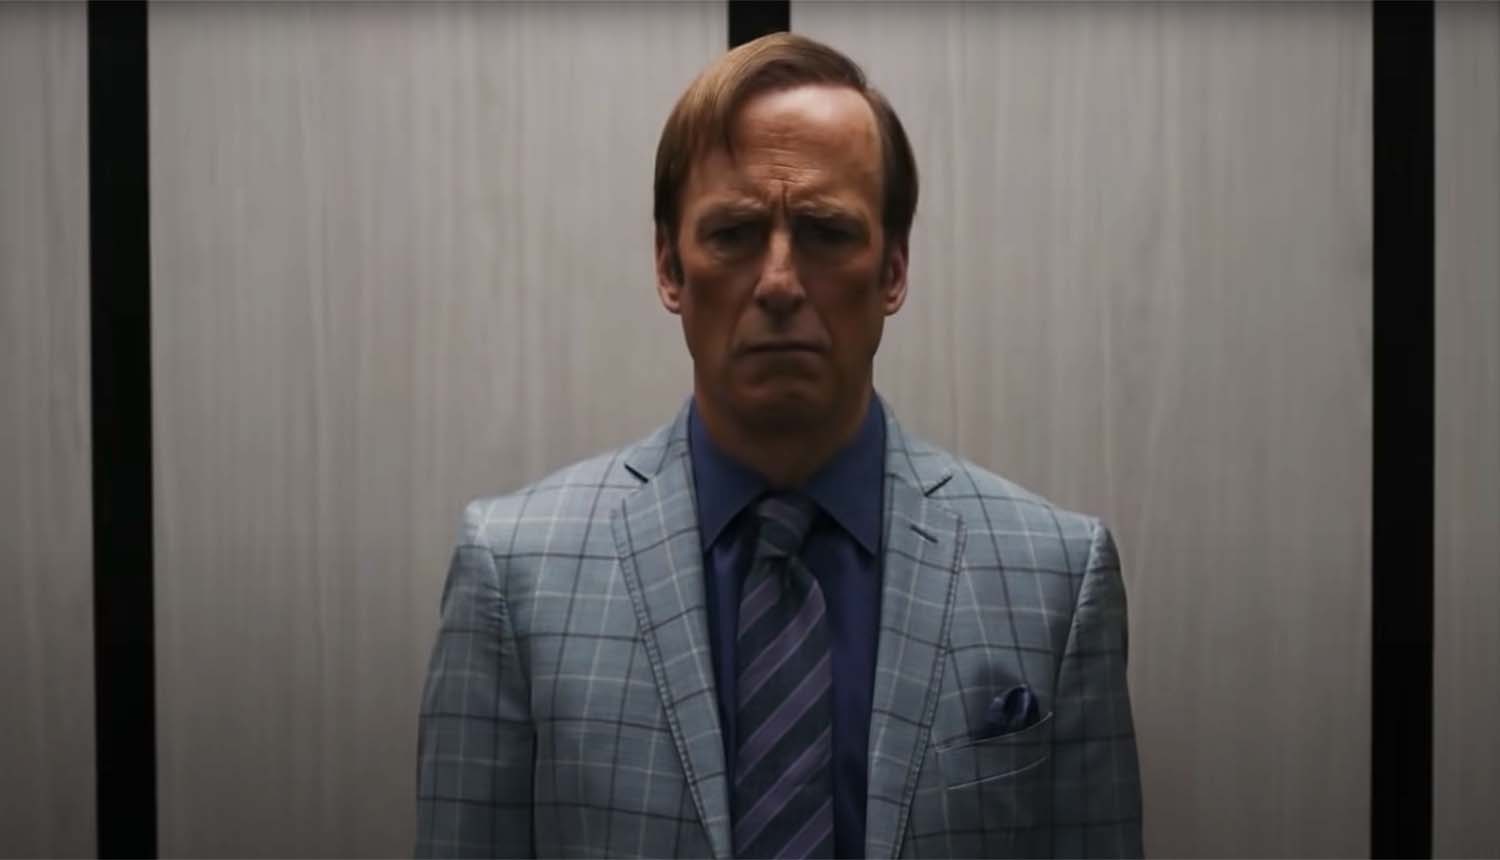 Why “Better Call Saul” Is TV's Best Show